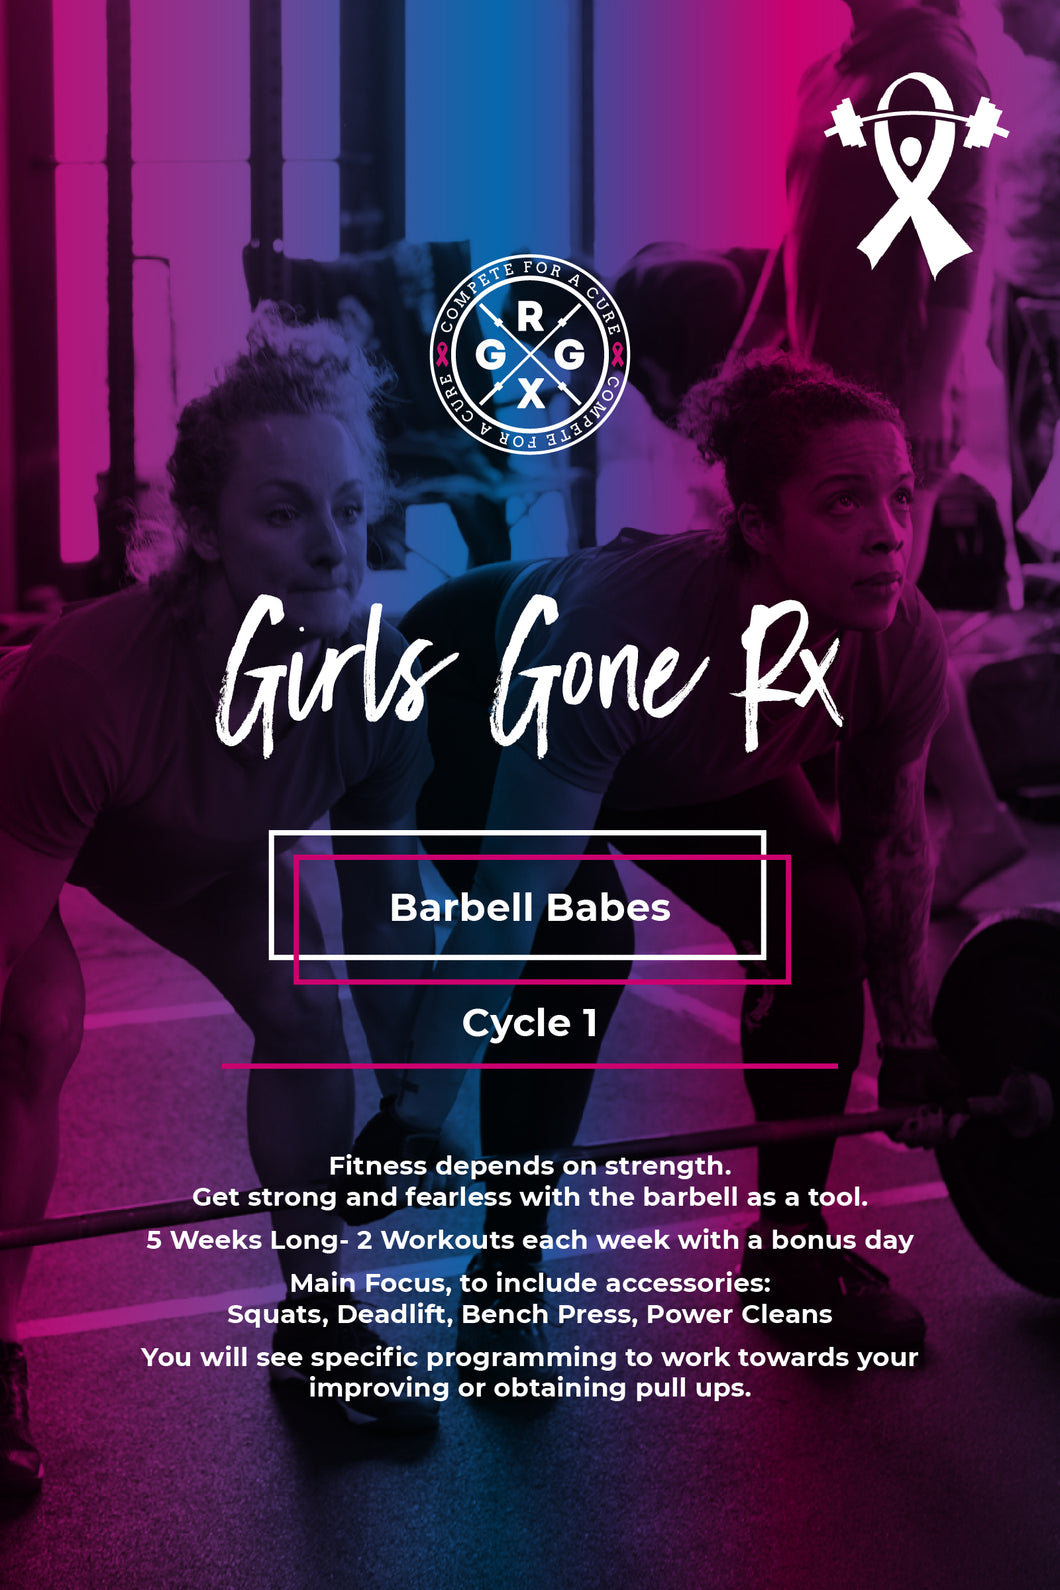 Barbell Babes- Cycle 1